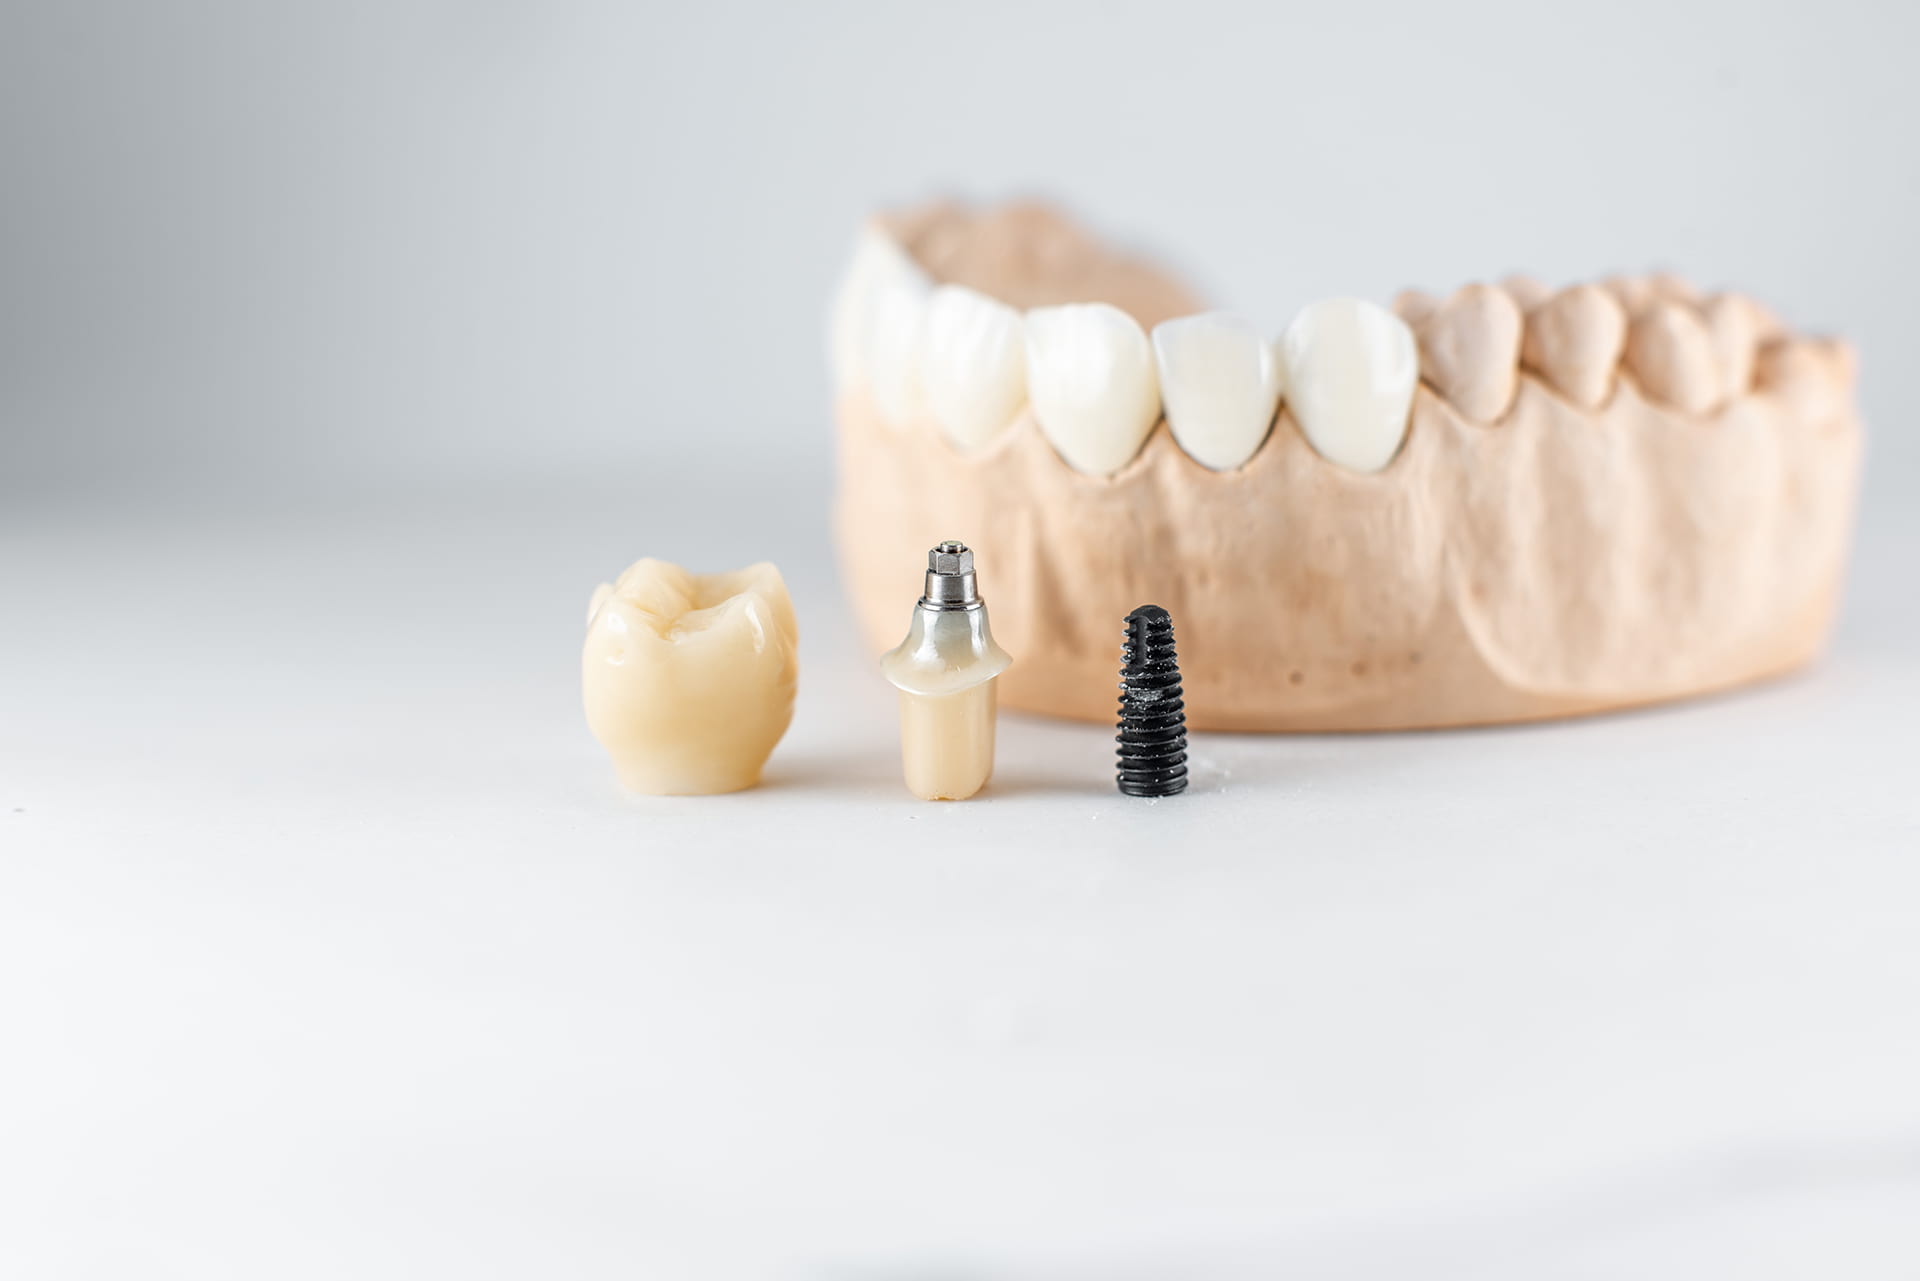 All-on-4 Dental Implants – A Game Changer for Your Smile